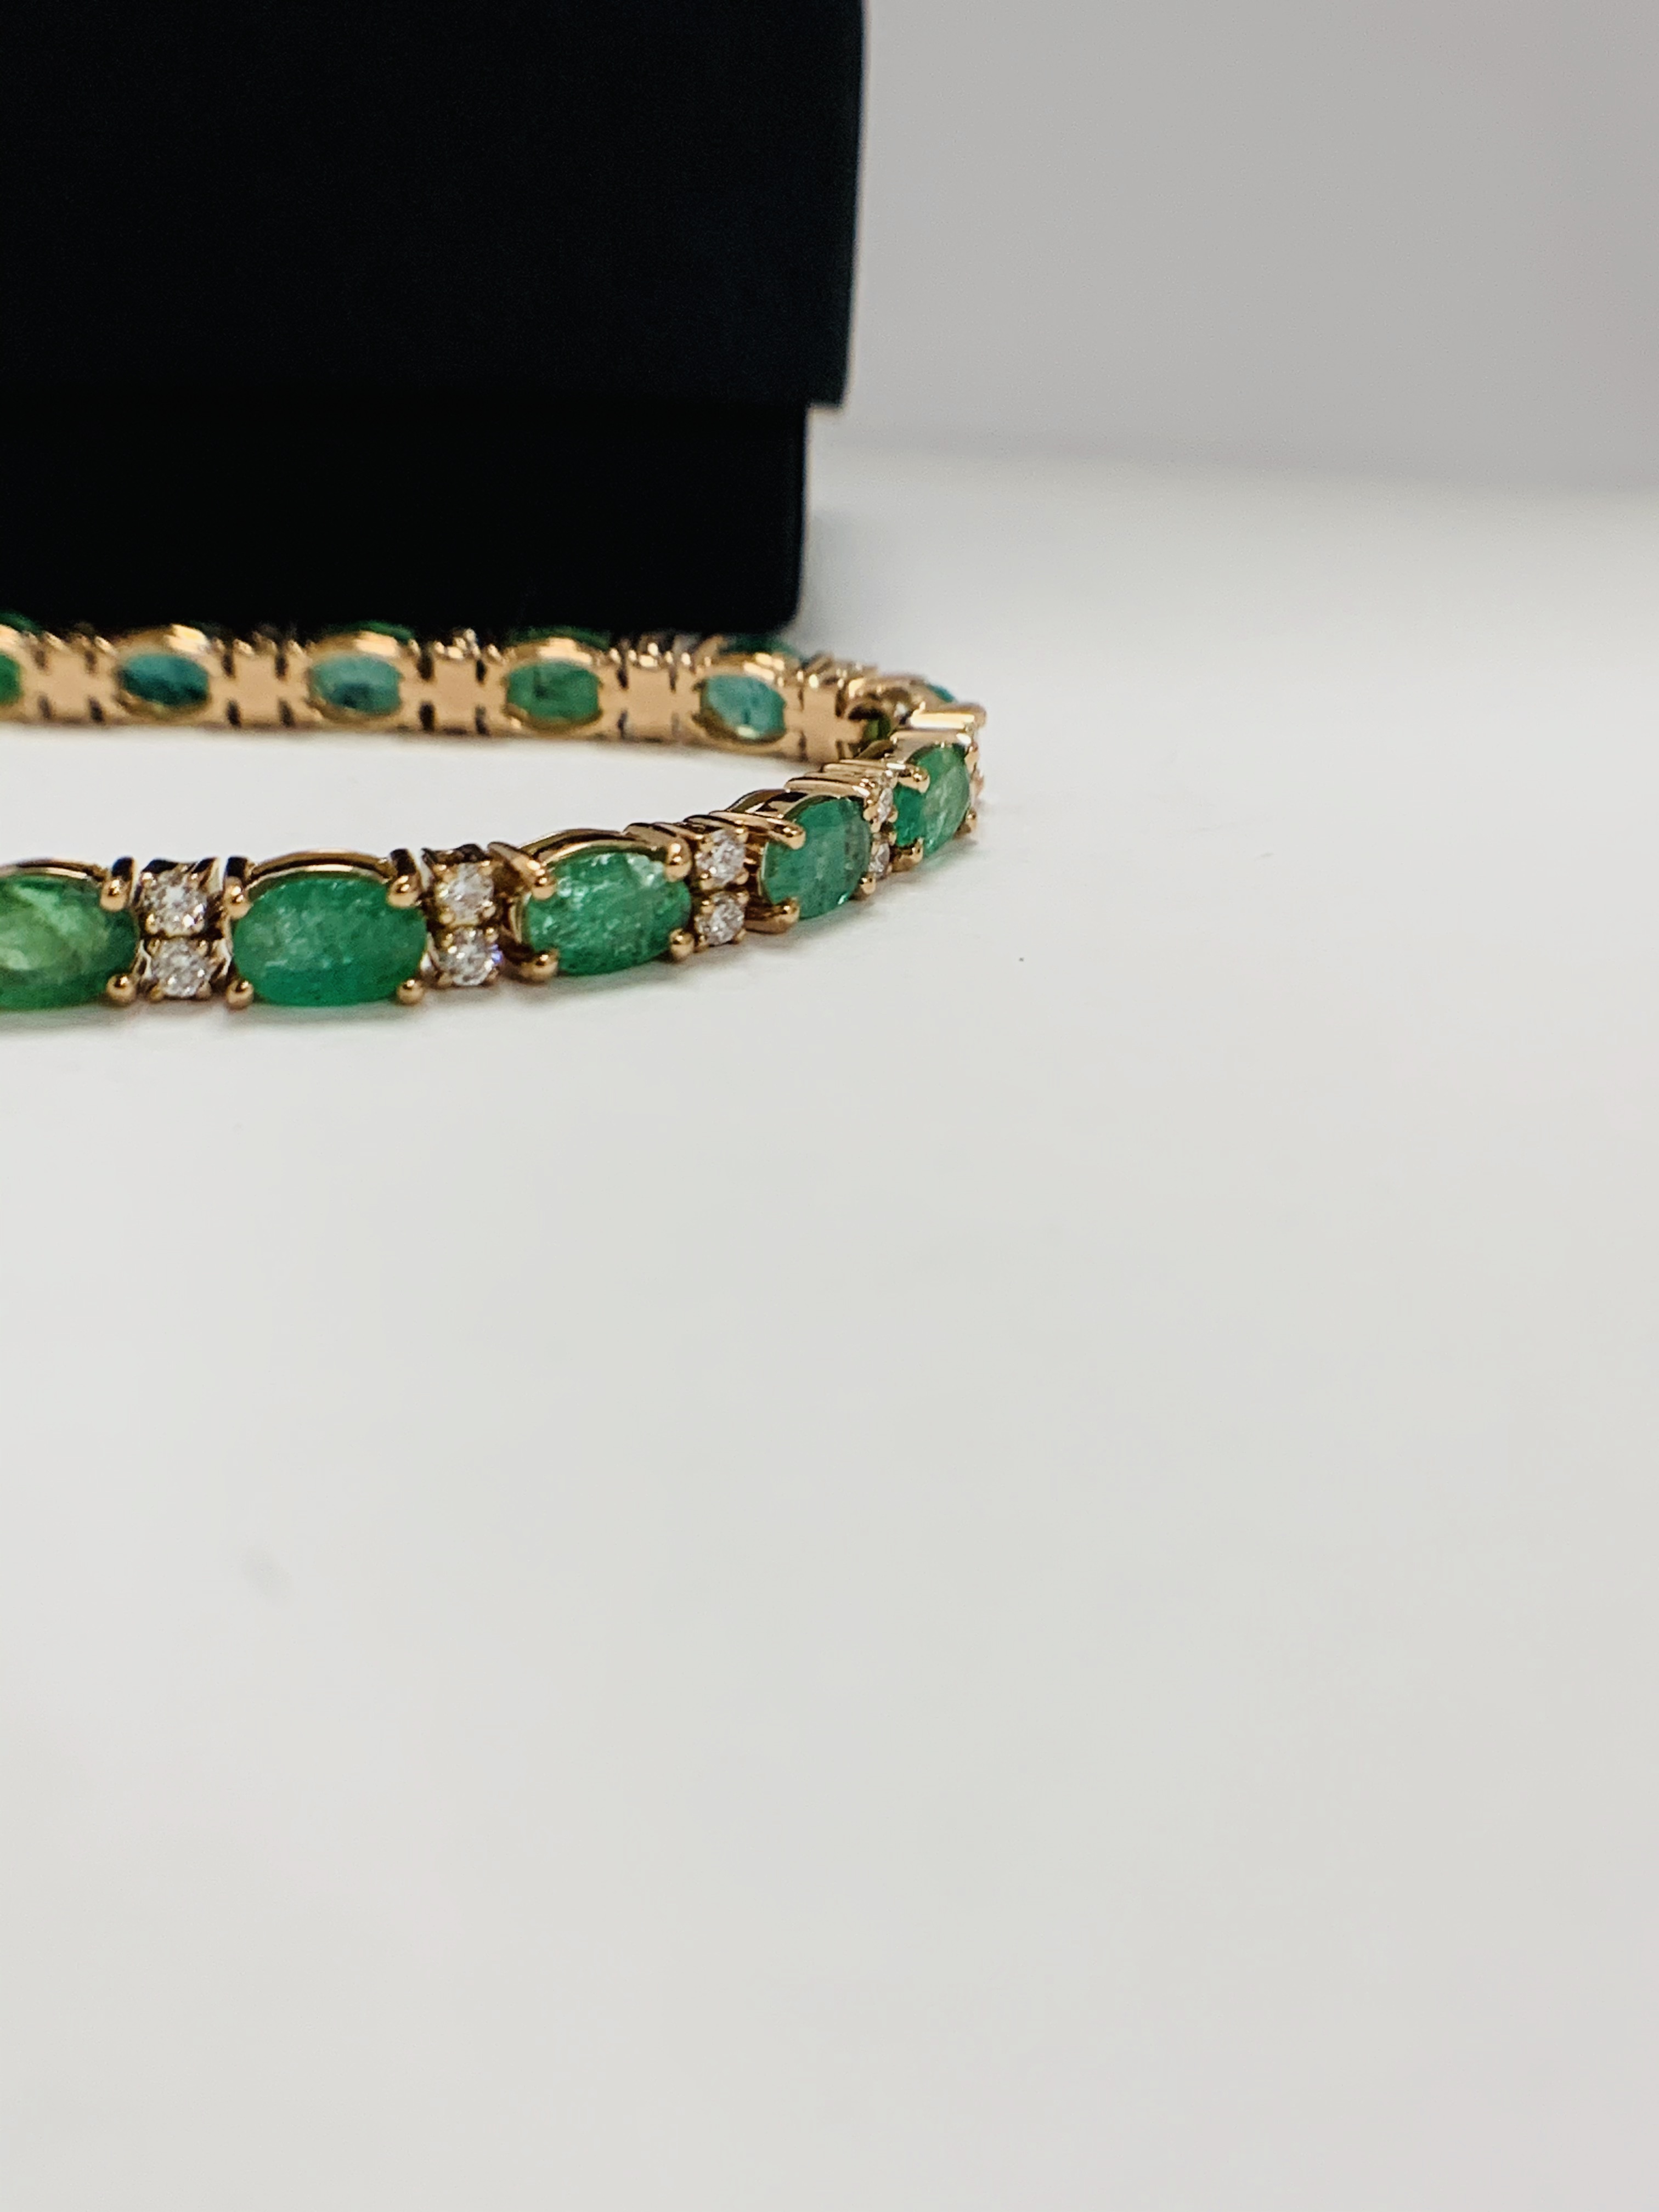 14ct Rose Gold Emerald and Diamond bracelet featuring, 21 oval cut, light green Emeralds (9.03ct TSW - Image 7 of 19